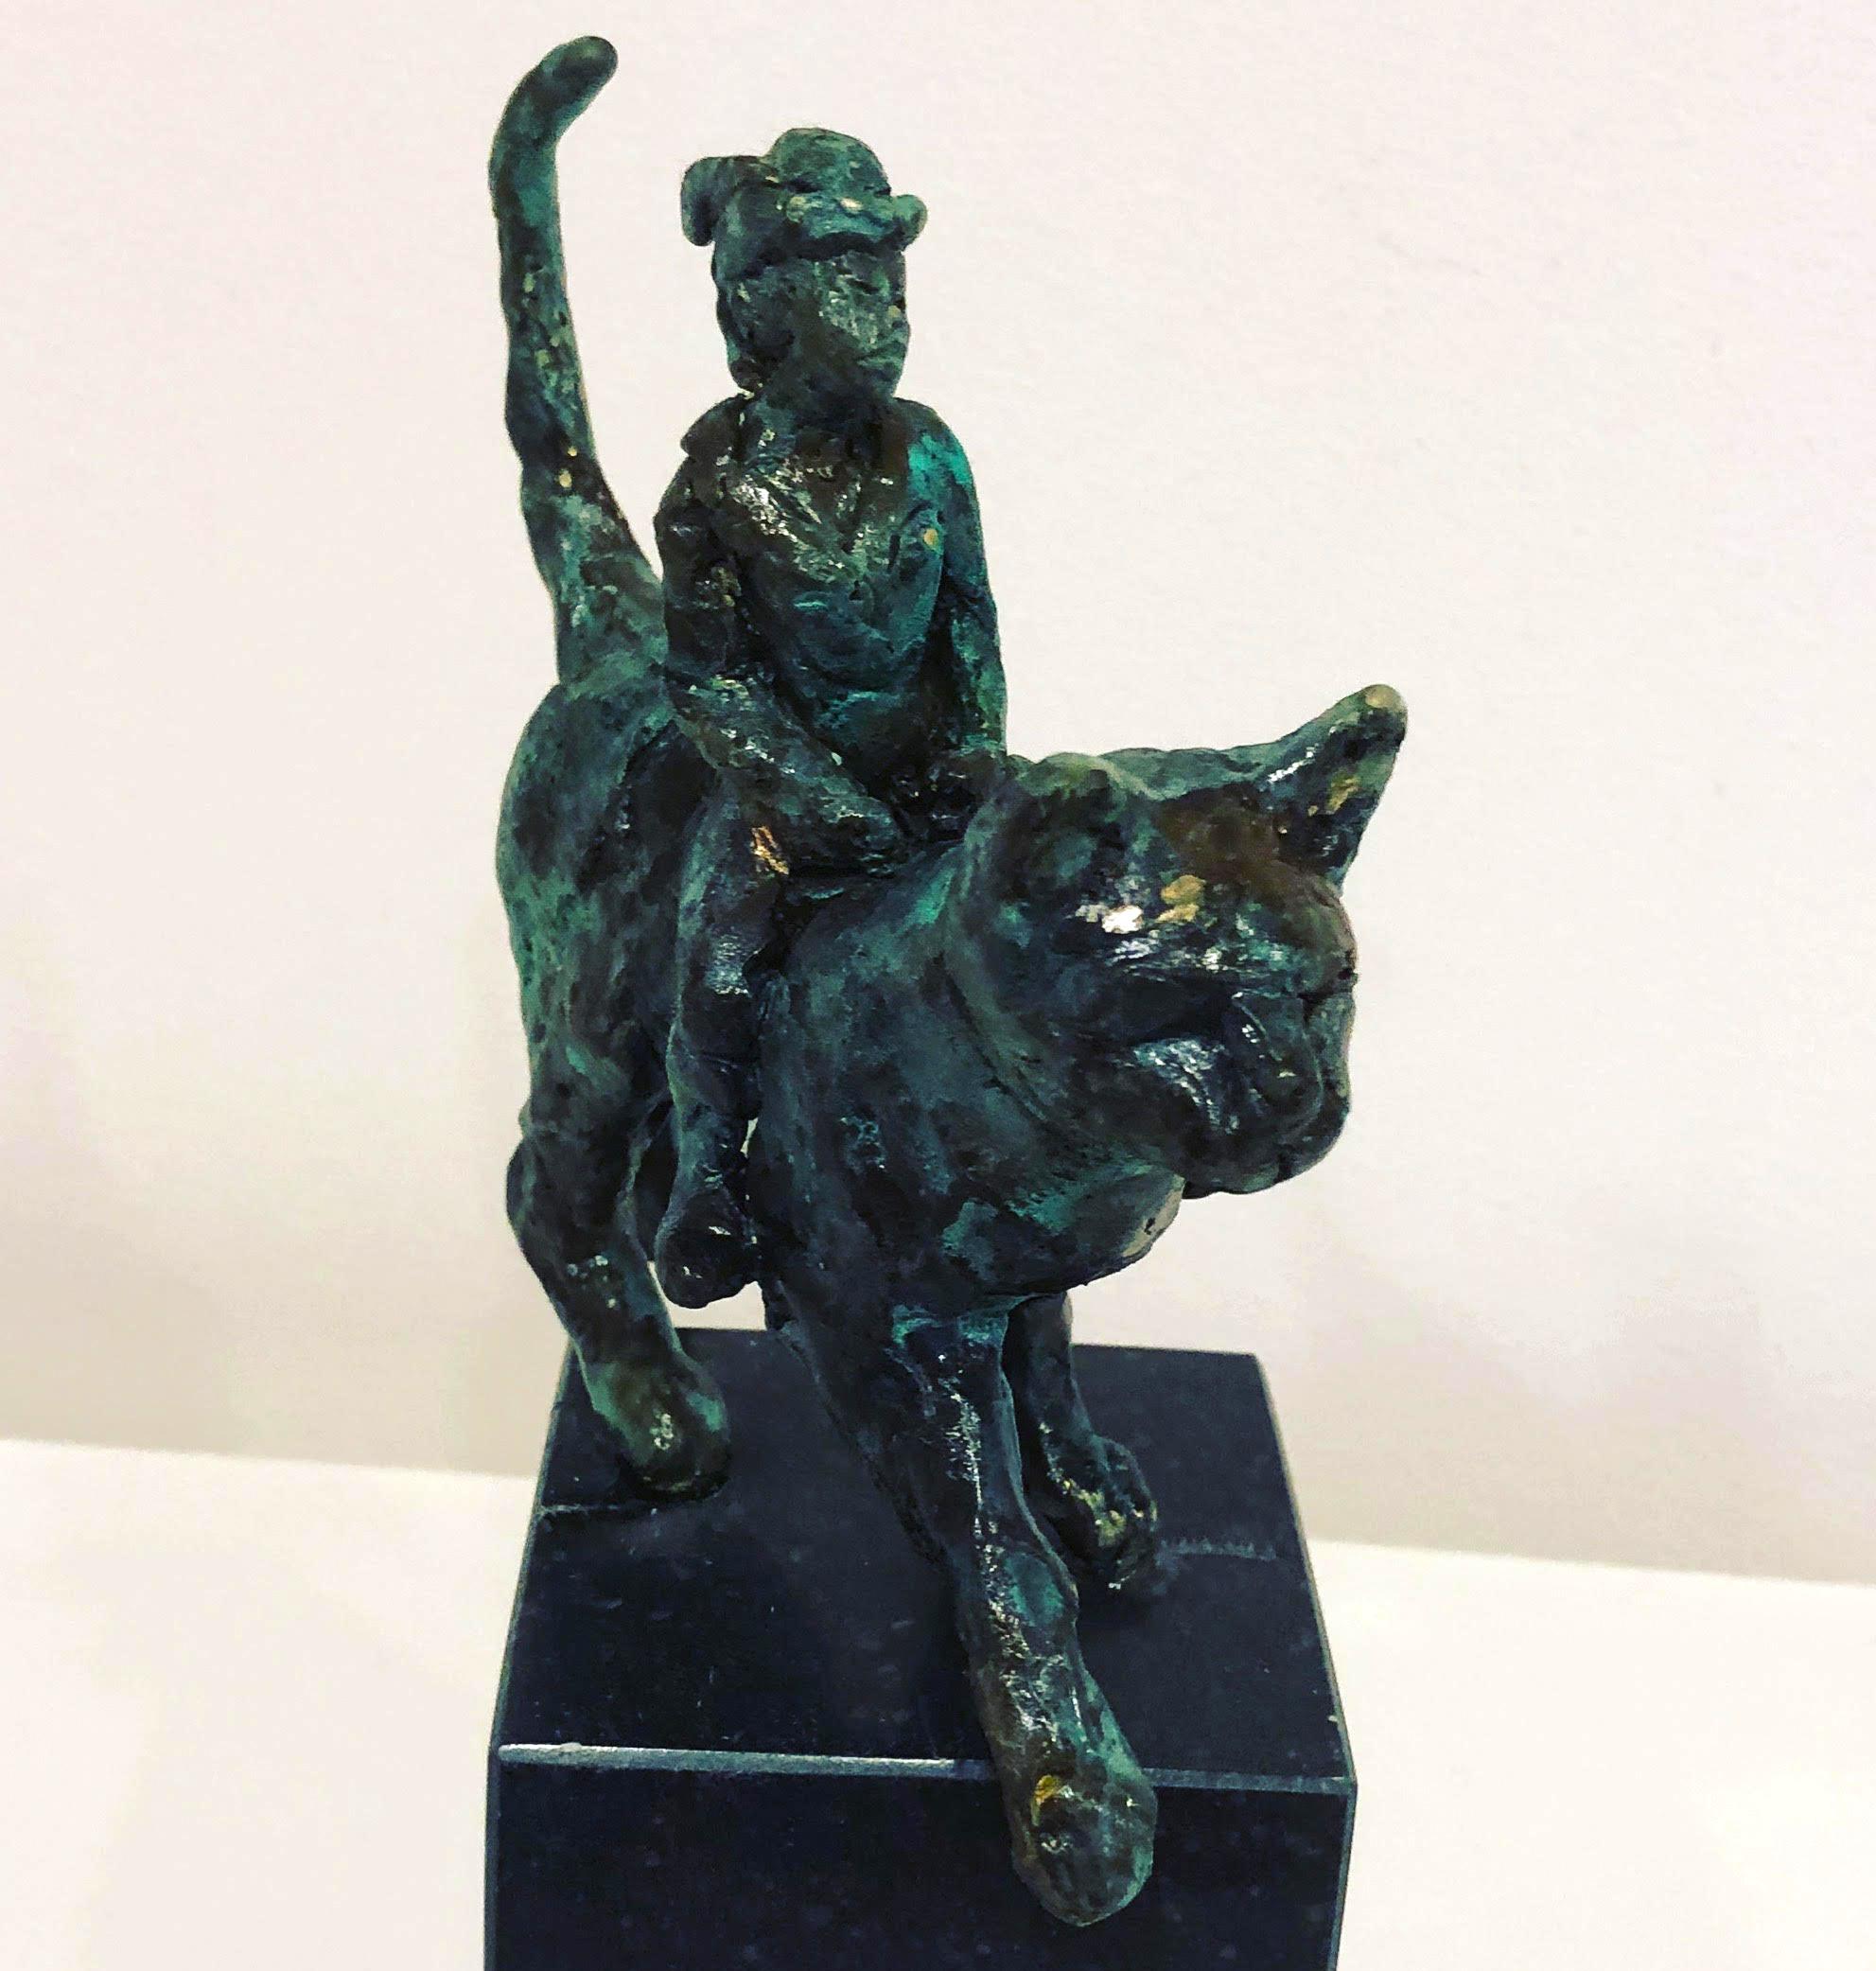 Catwoman by Helle Crawford, Contemporary Green Black Bronze Cat Sculpture - Gold Figurative Sculpture by Helle Rask Crawford